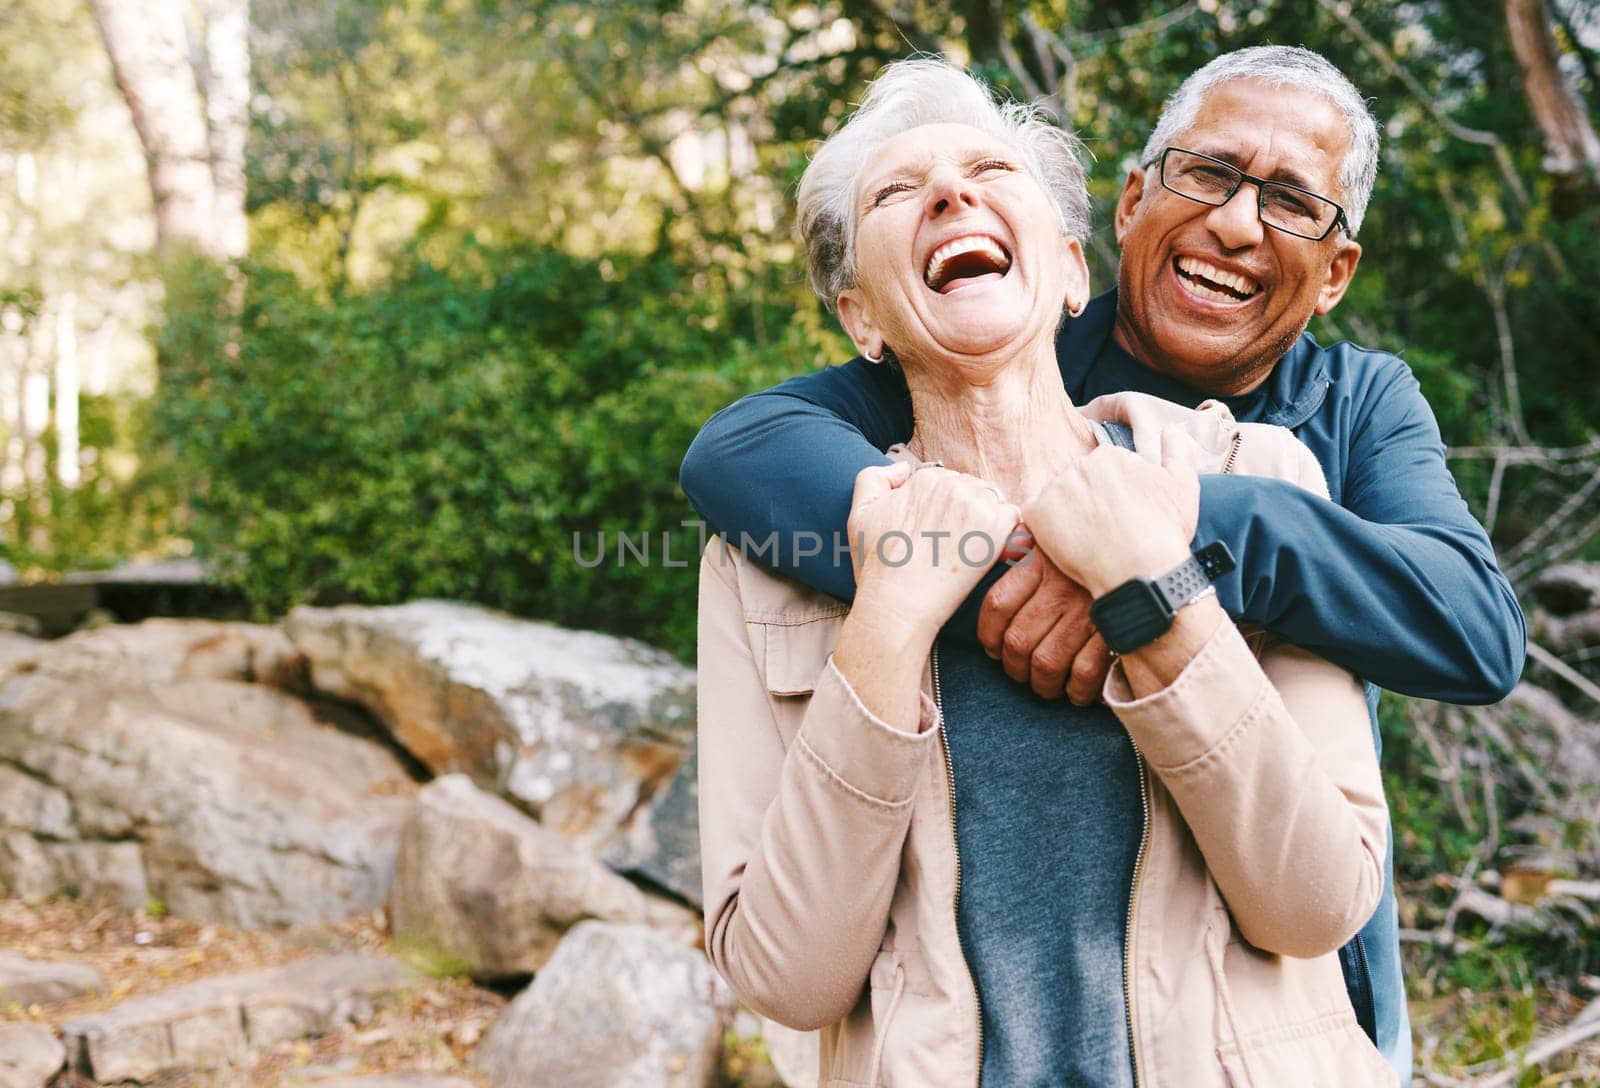 Hiking, laugh and romance with a senior couple hugging while in the woods or nature forest together in summer for a hike. Fun, joke and bonding with a mature man and woman enjoying retirement outdoor by YuriArcurs